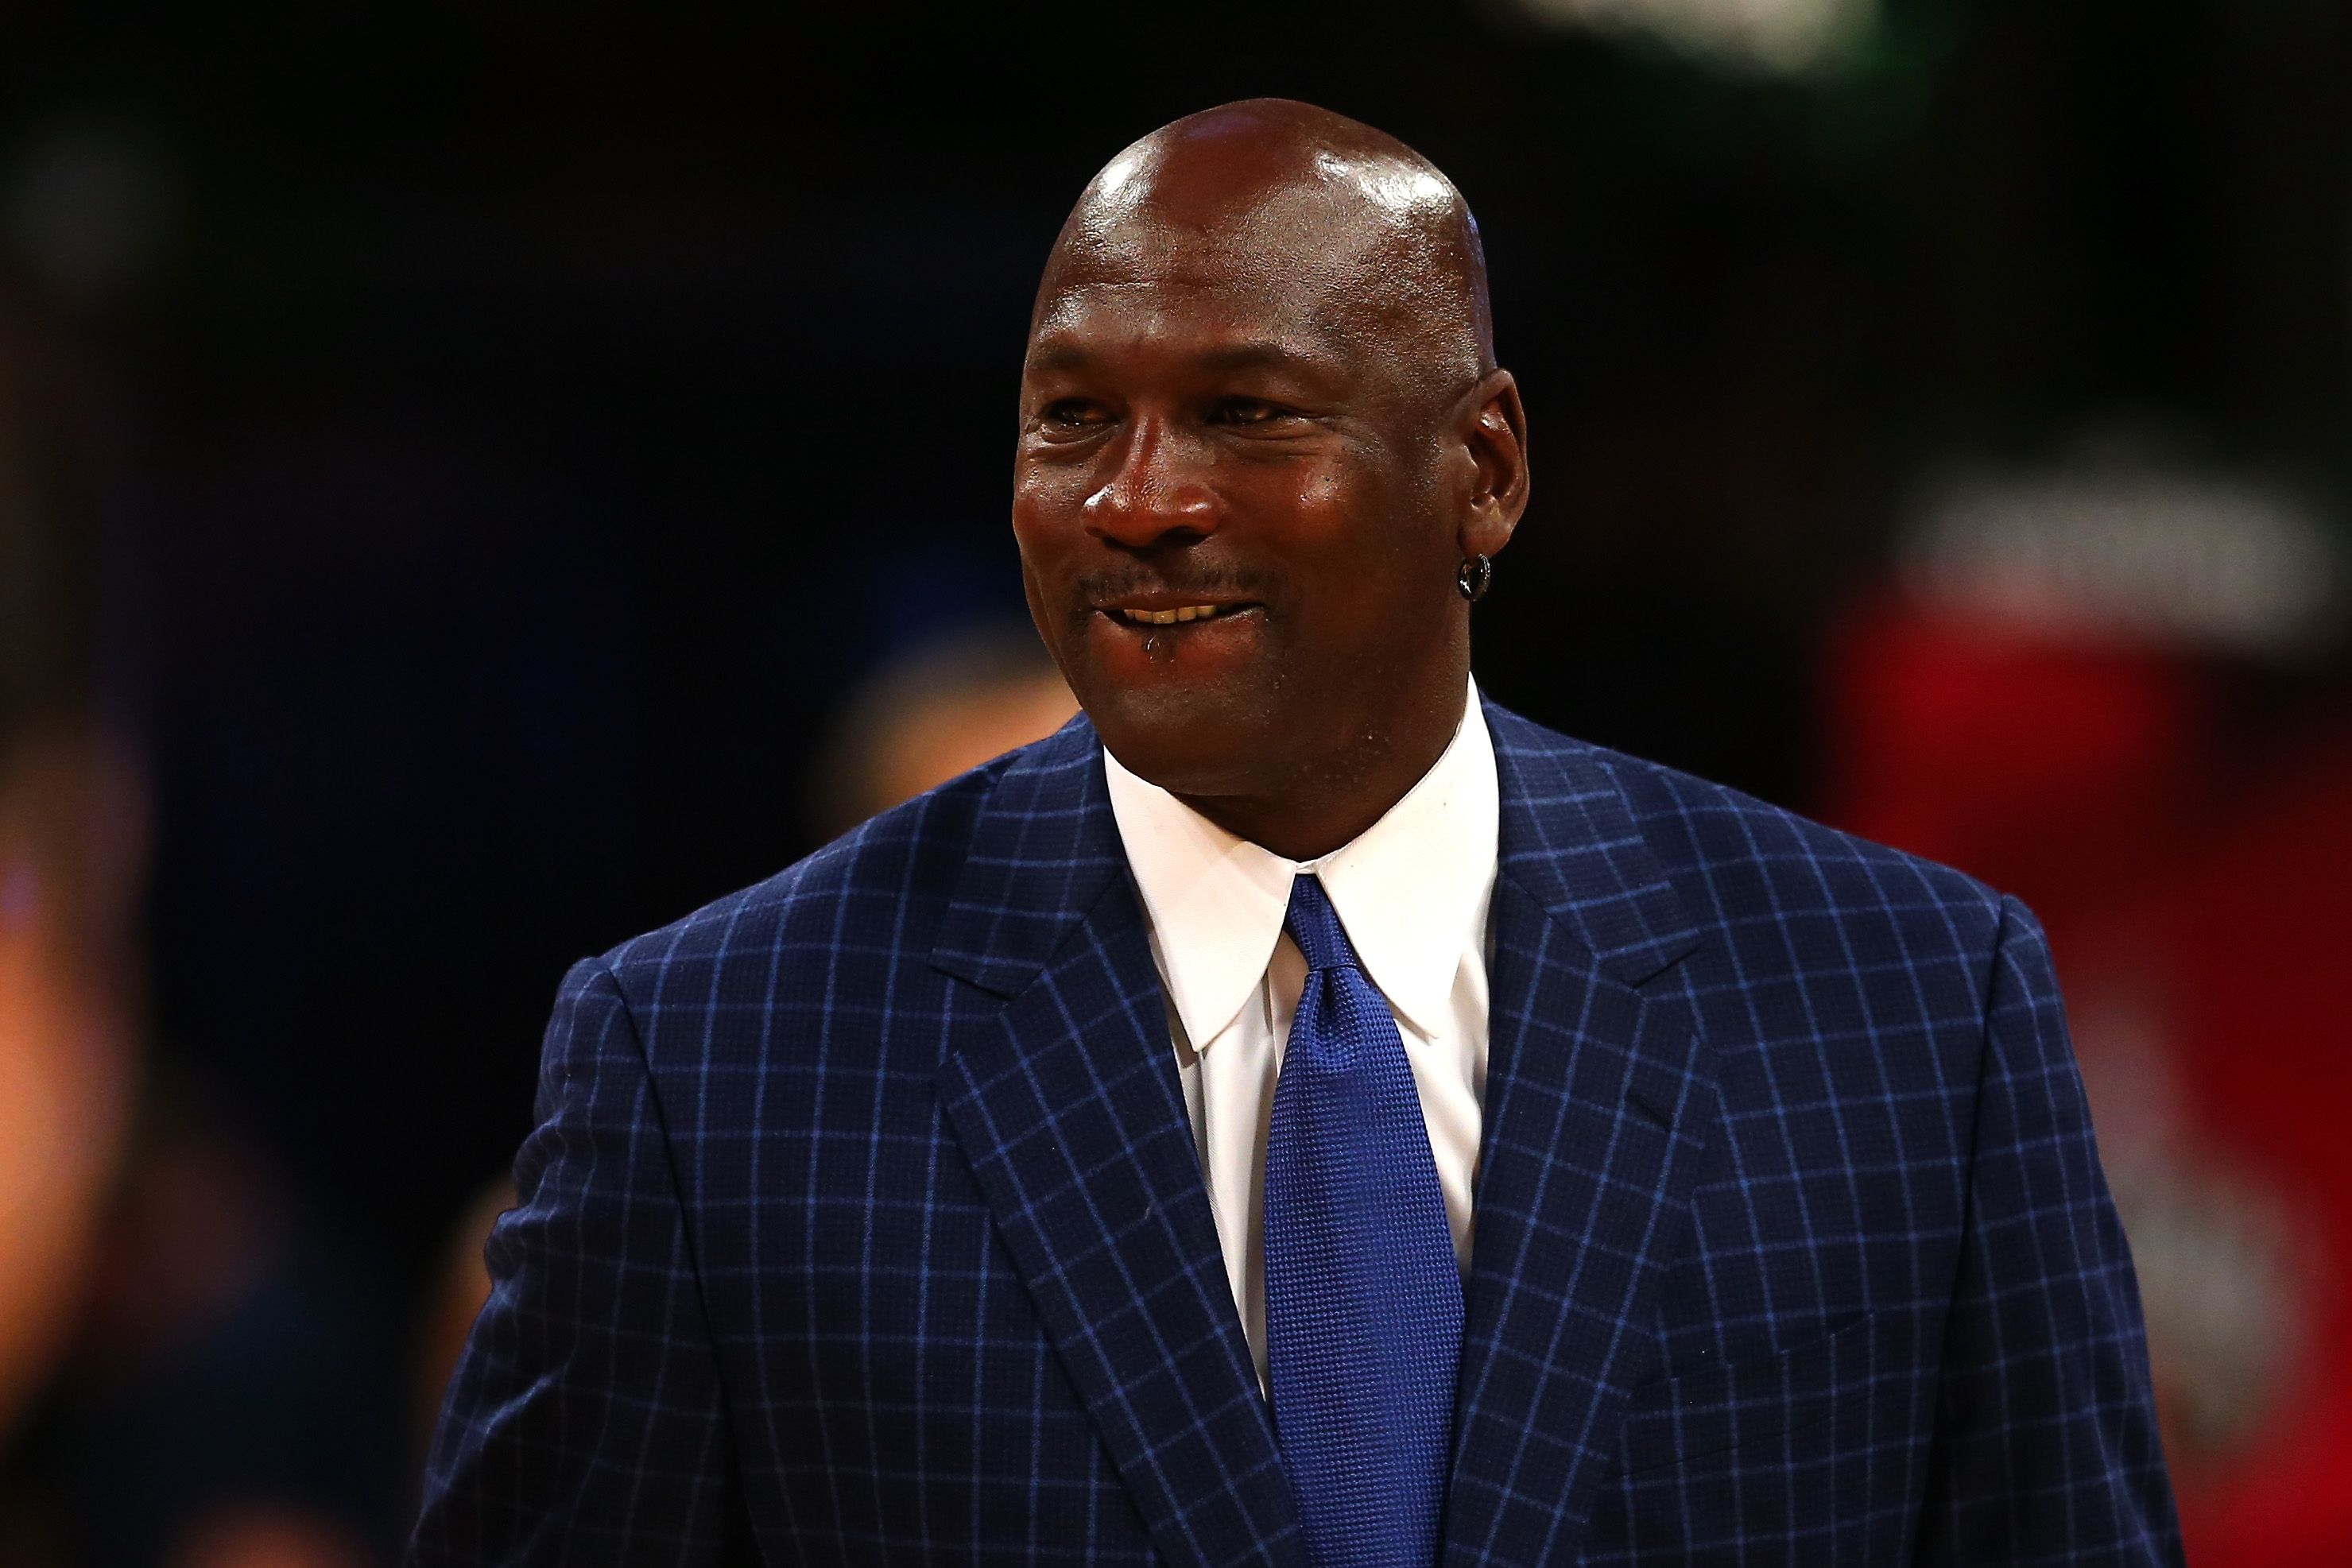 Michael Jordan walks off the court at the NBA All-Star Game 2016 at the Air Canada Centre on February 14, 2016 | Photo: Getty Images